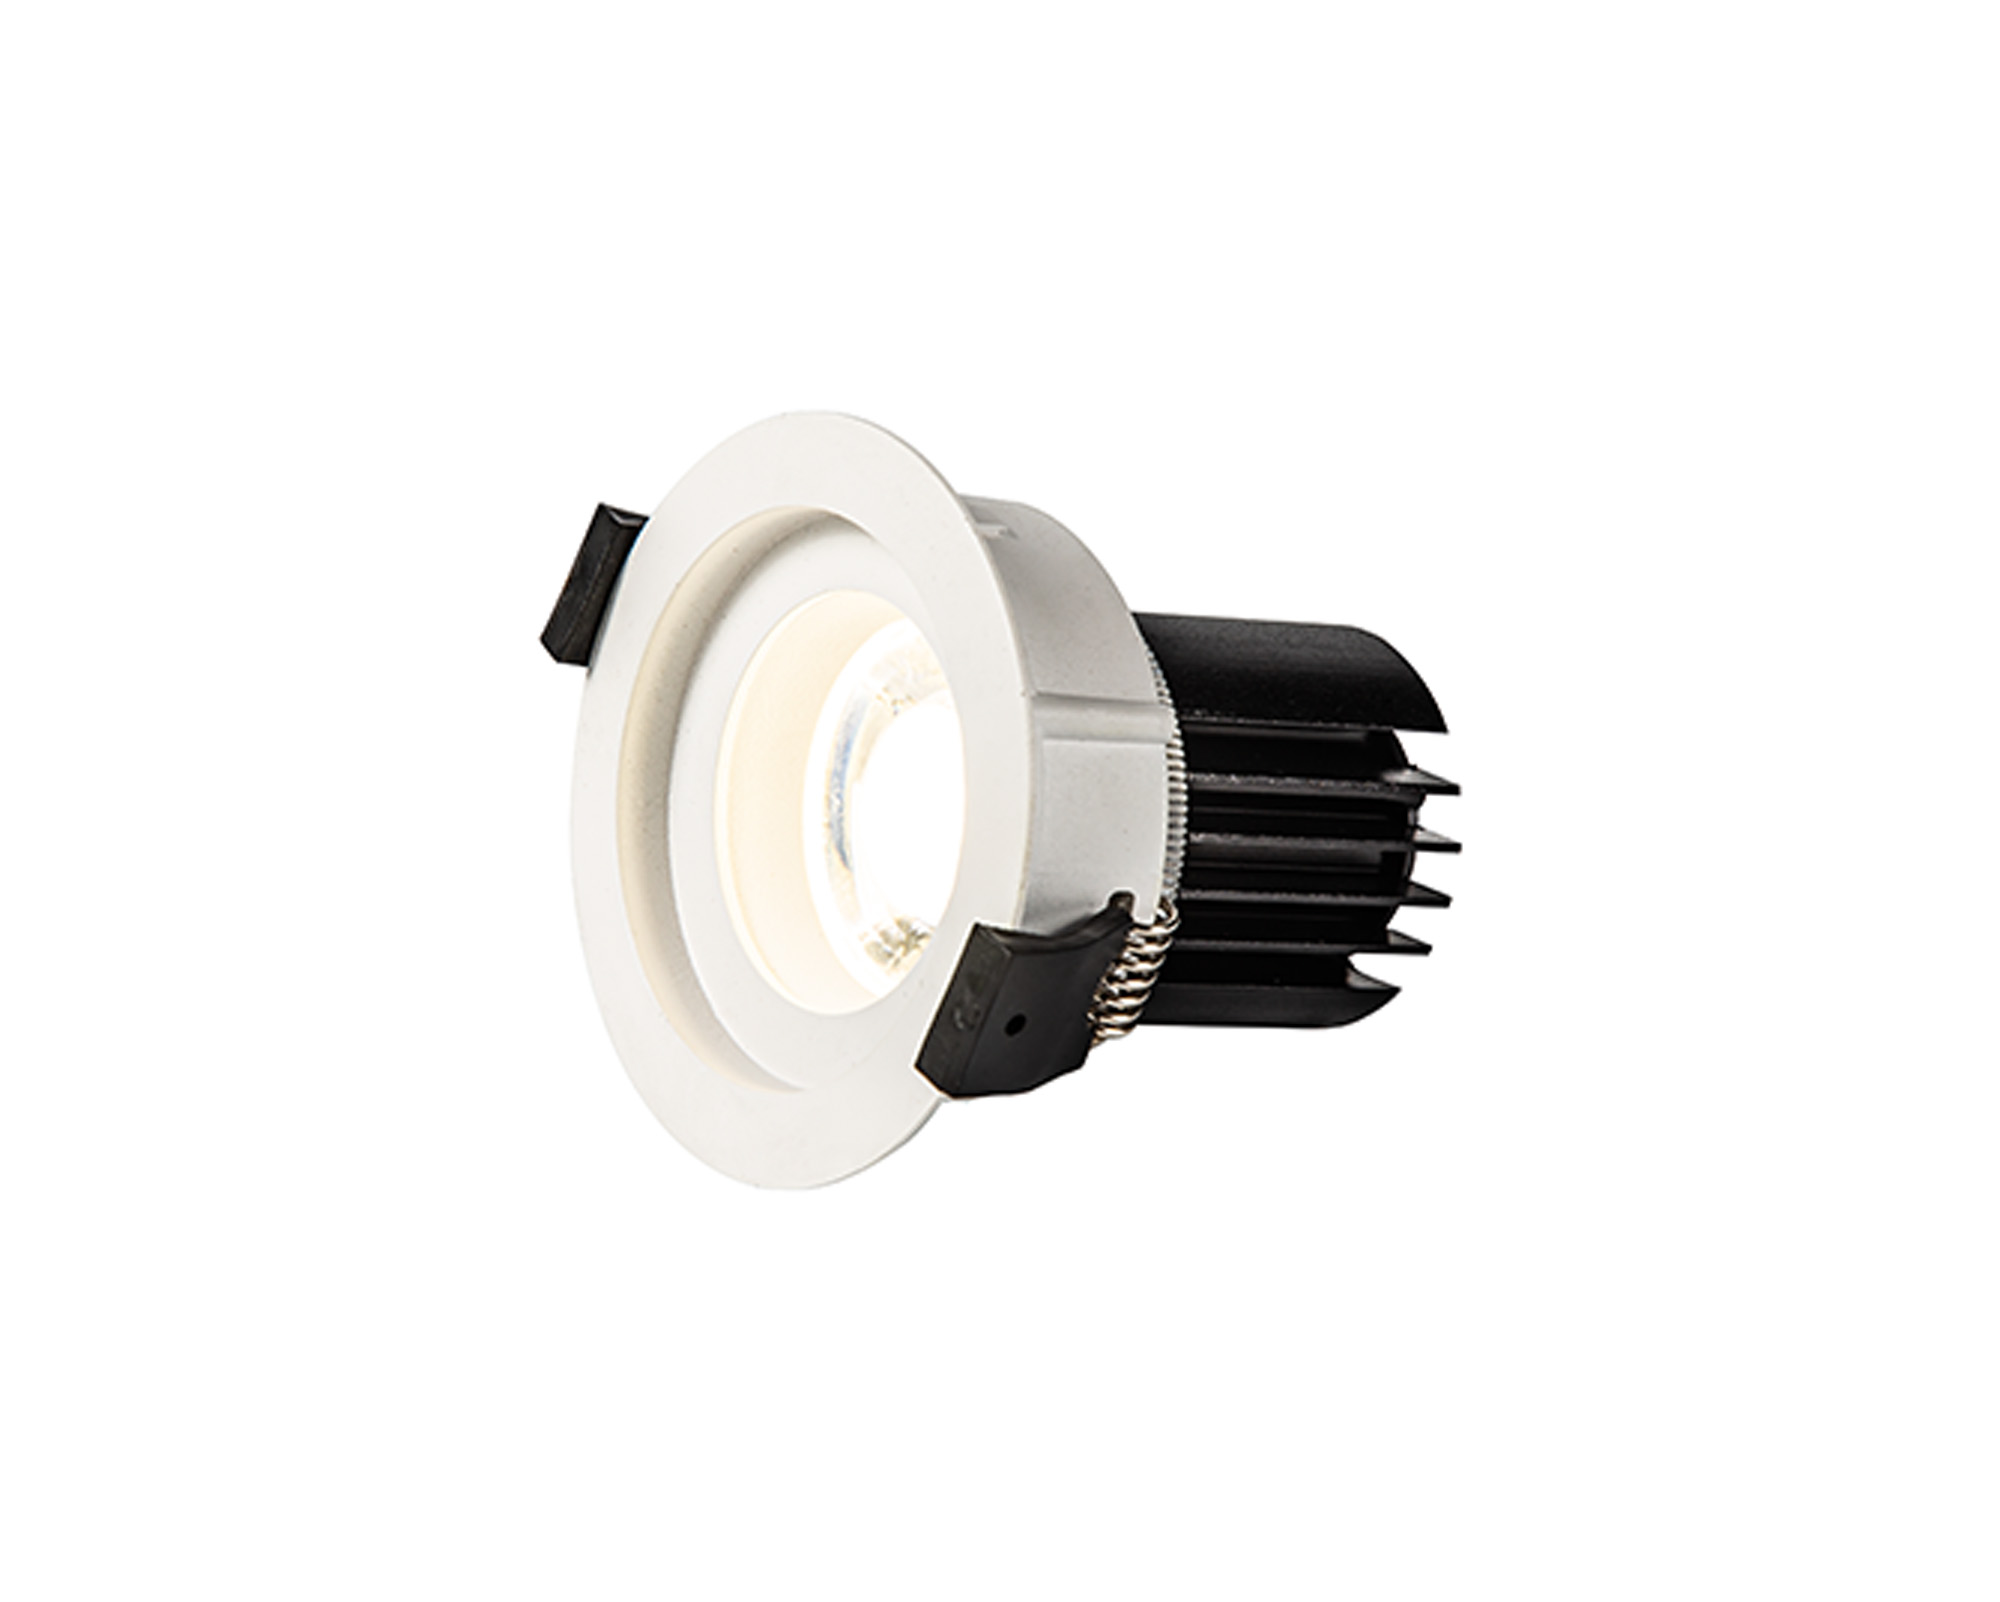 DM202318  Beppe 9 Tridonic Powered 9W 2700K 770lm 24° CRI>90 LED Engine White Stepped Fixed Recessed Spotlight; IP20